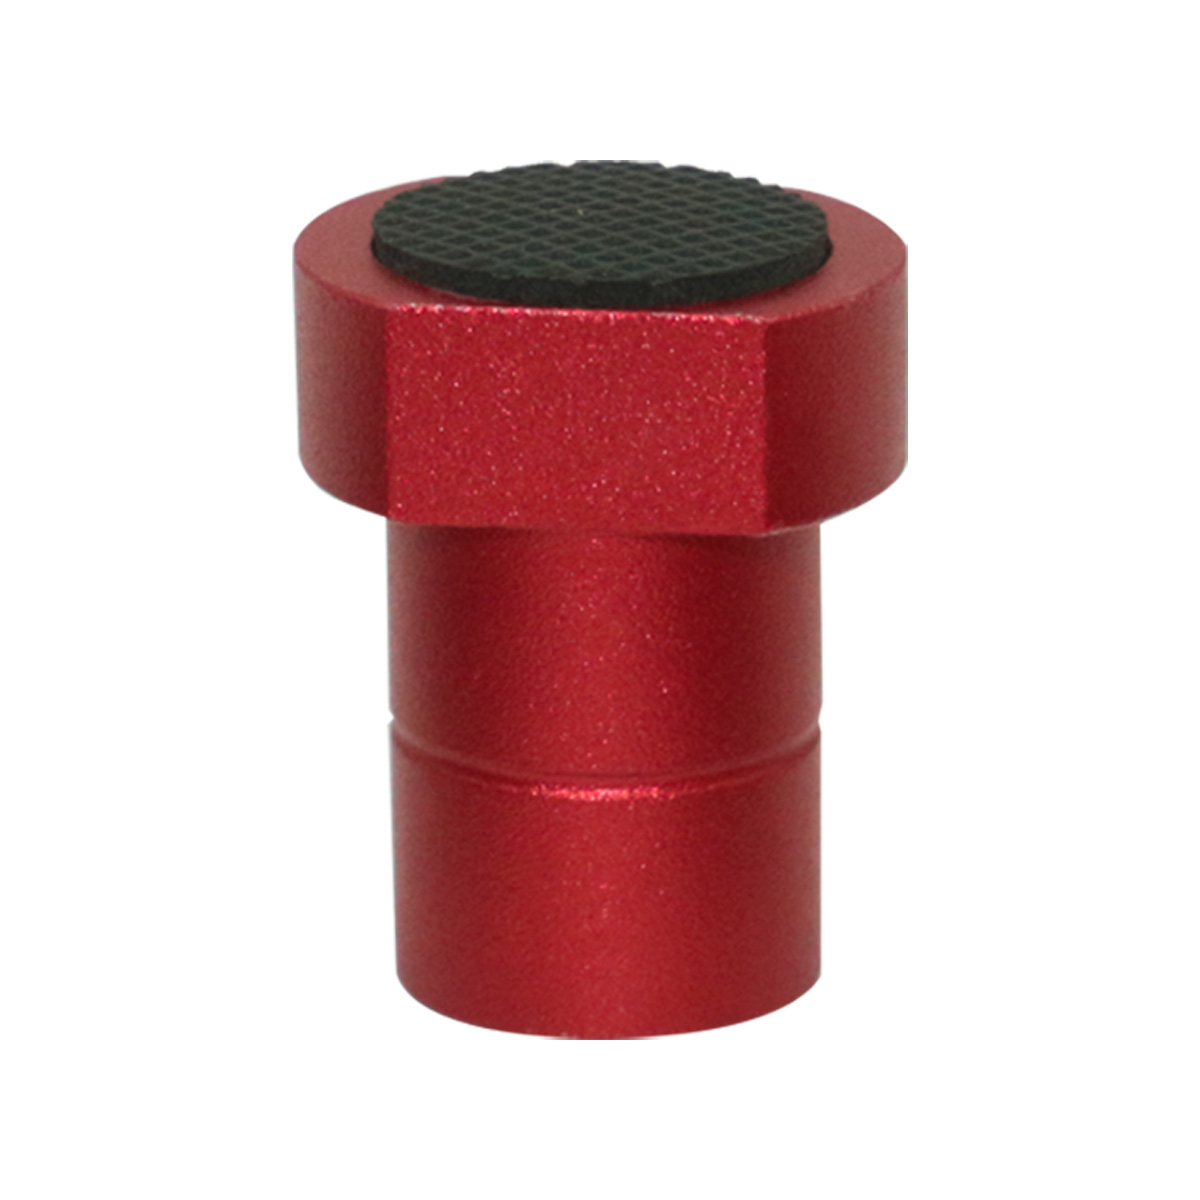 19/20mm Woodworking Bench Dogs Aluminum Alloy Red Anti-Slip Quick Release for T-Track Planing and Positioning Plug